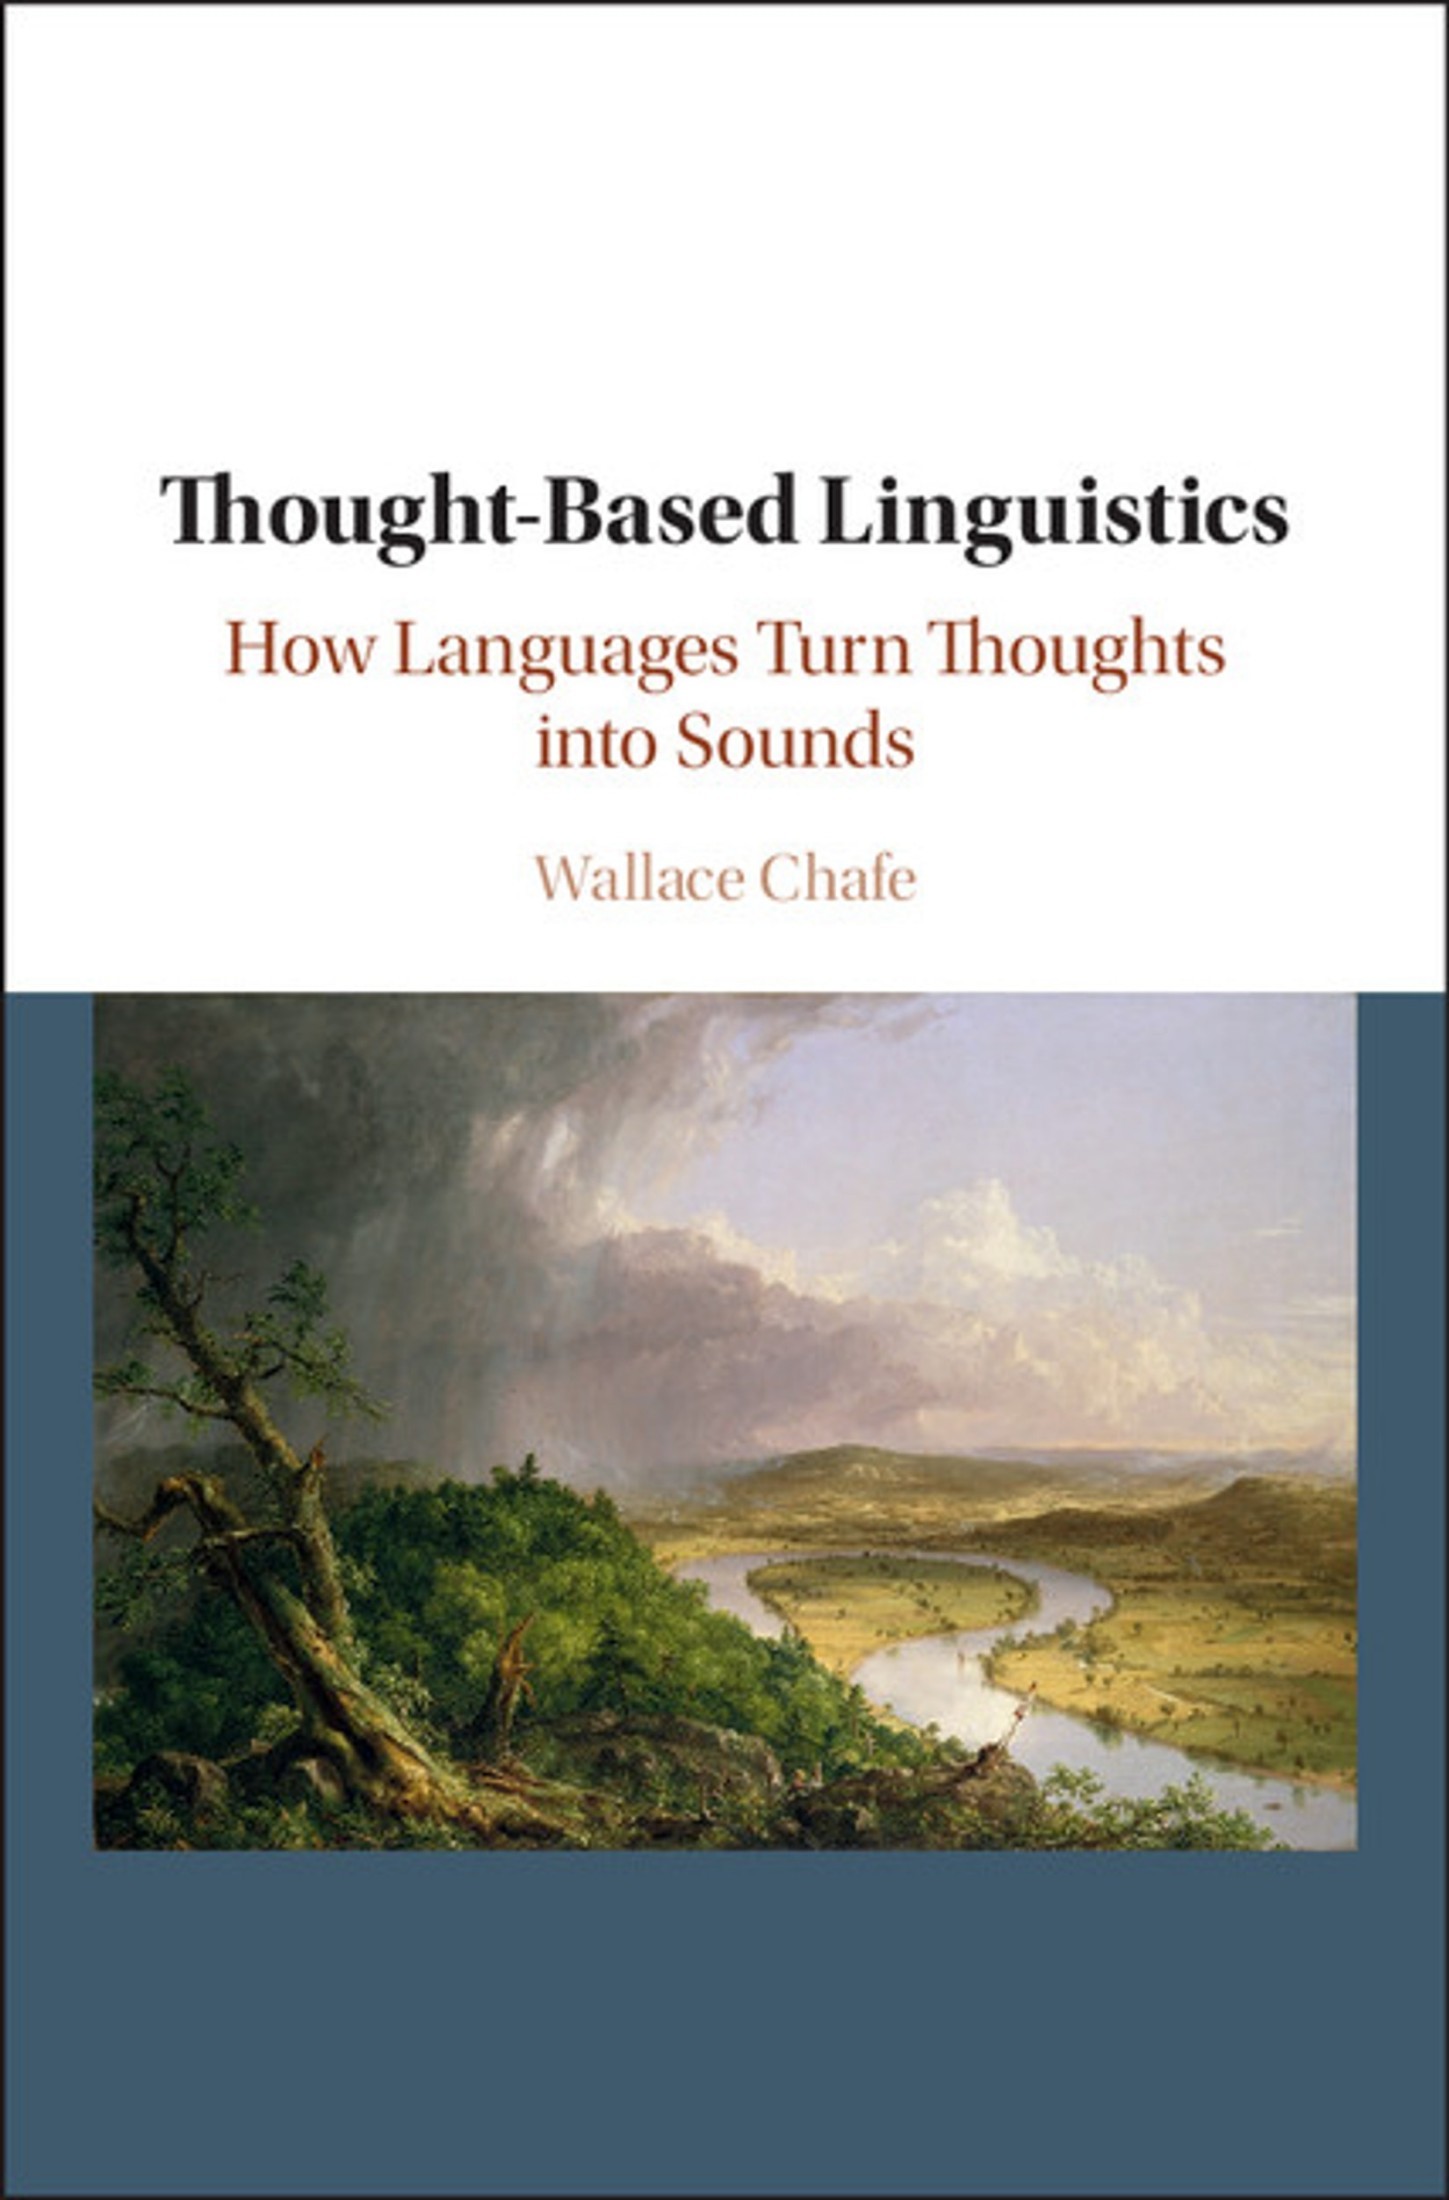 Thought-Based Linguistics: How Languages Turn Thoughts Into Sounds